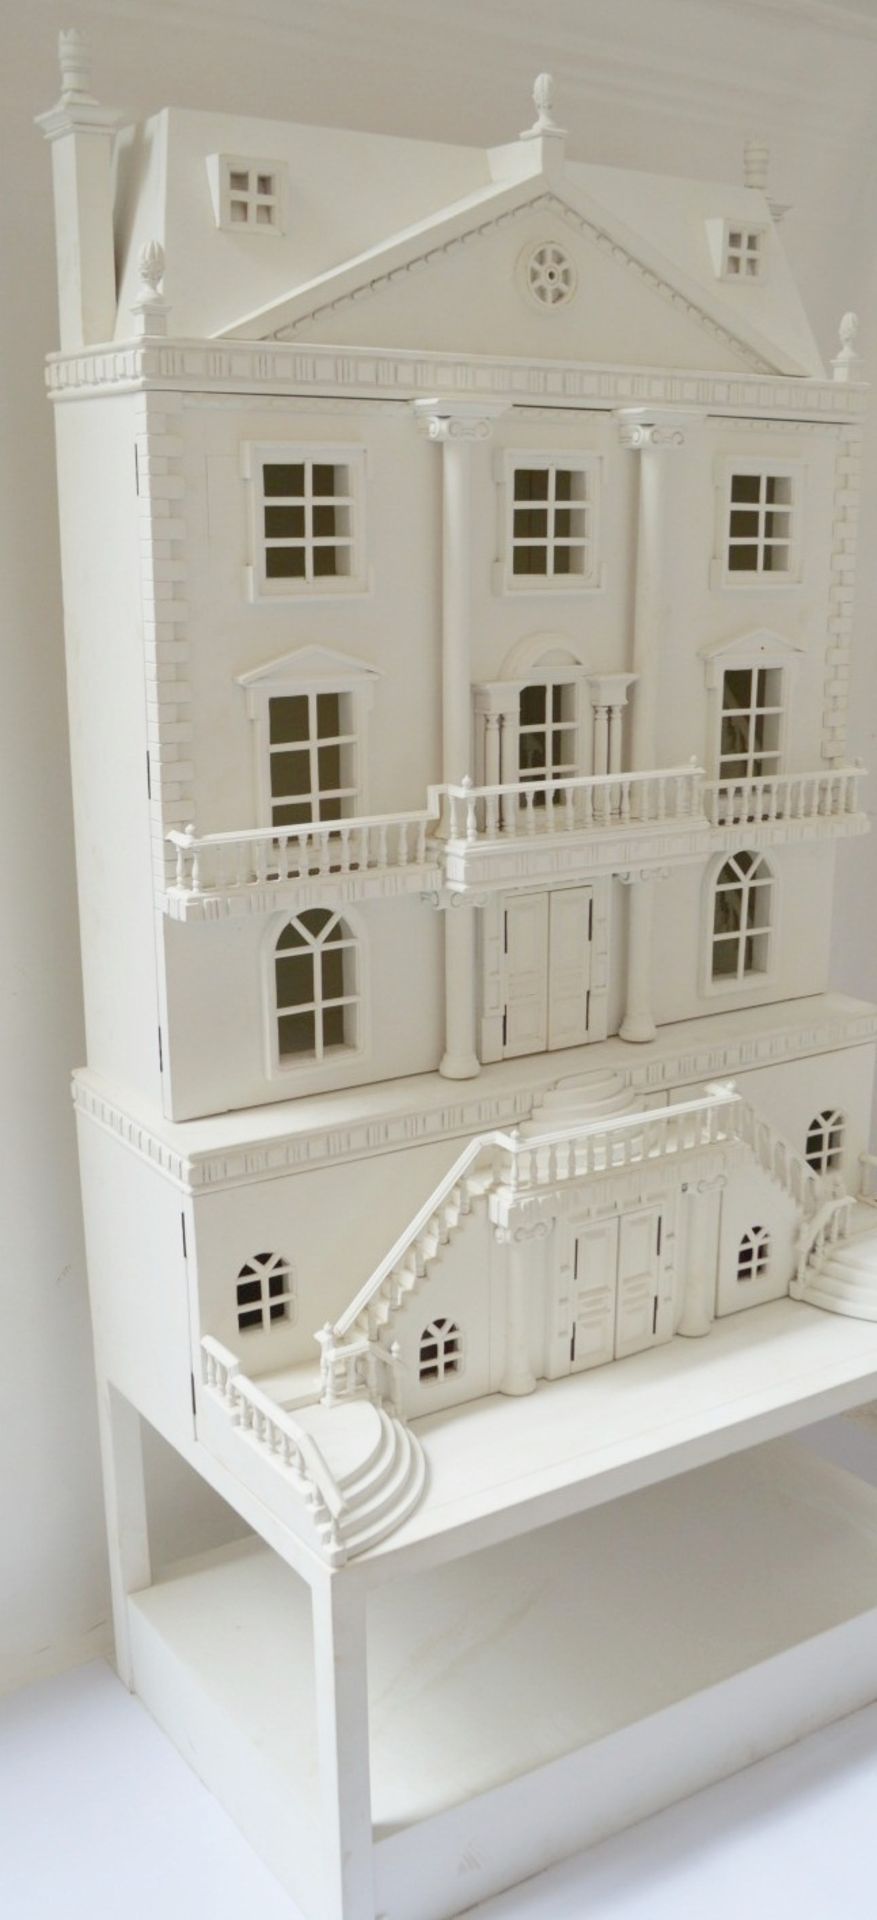 1 x Impressive Bespoke Hand Crafted Wooden Dolls House In White - Image 4 of 19